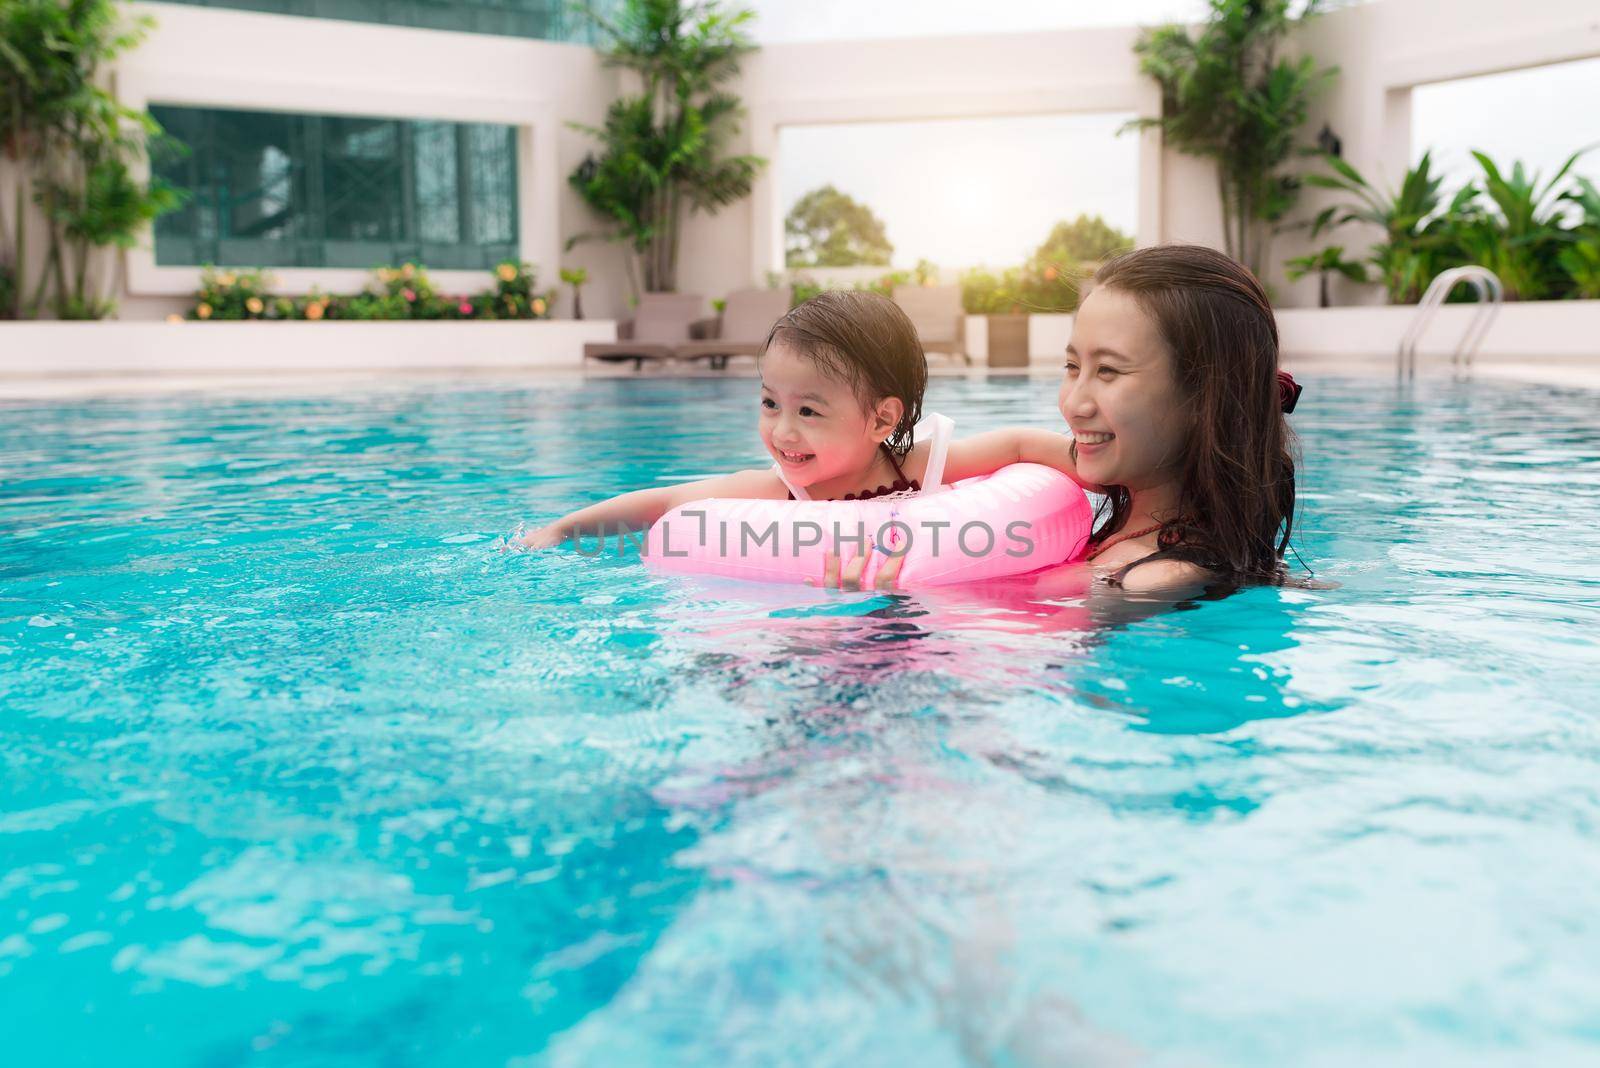 Mother and baby girl having fun in the pool. Summer holidays and vacation concept